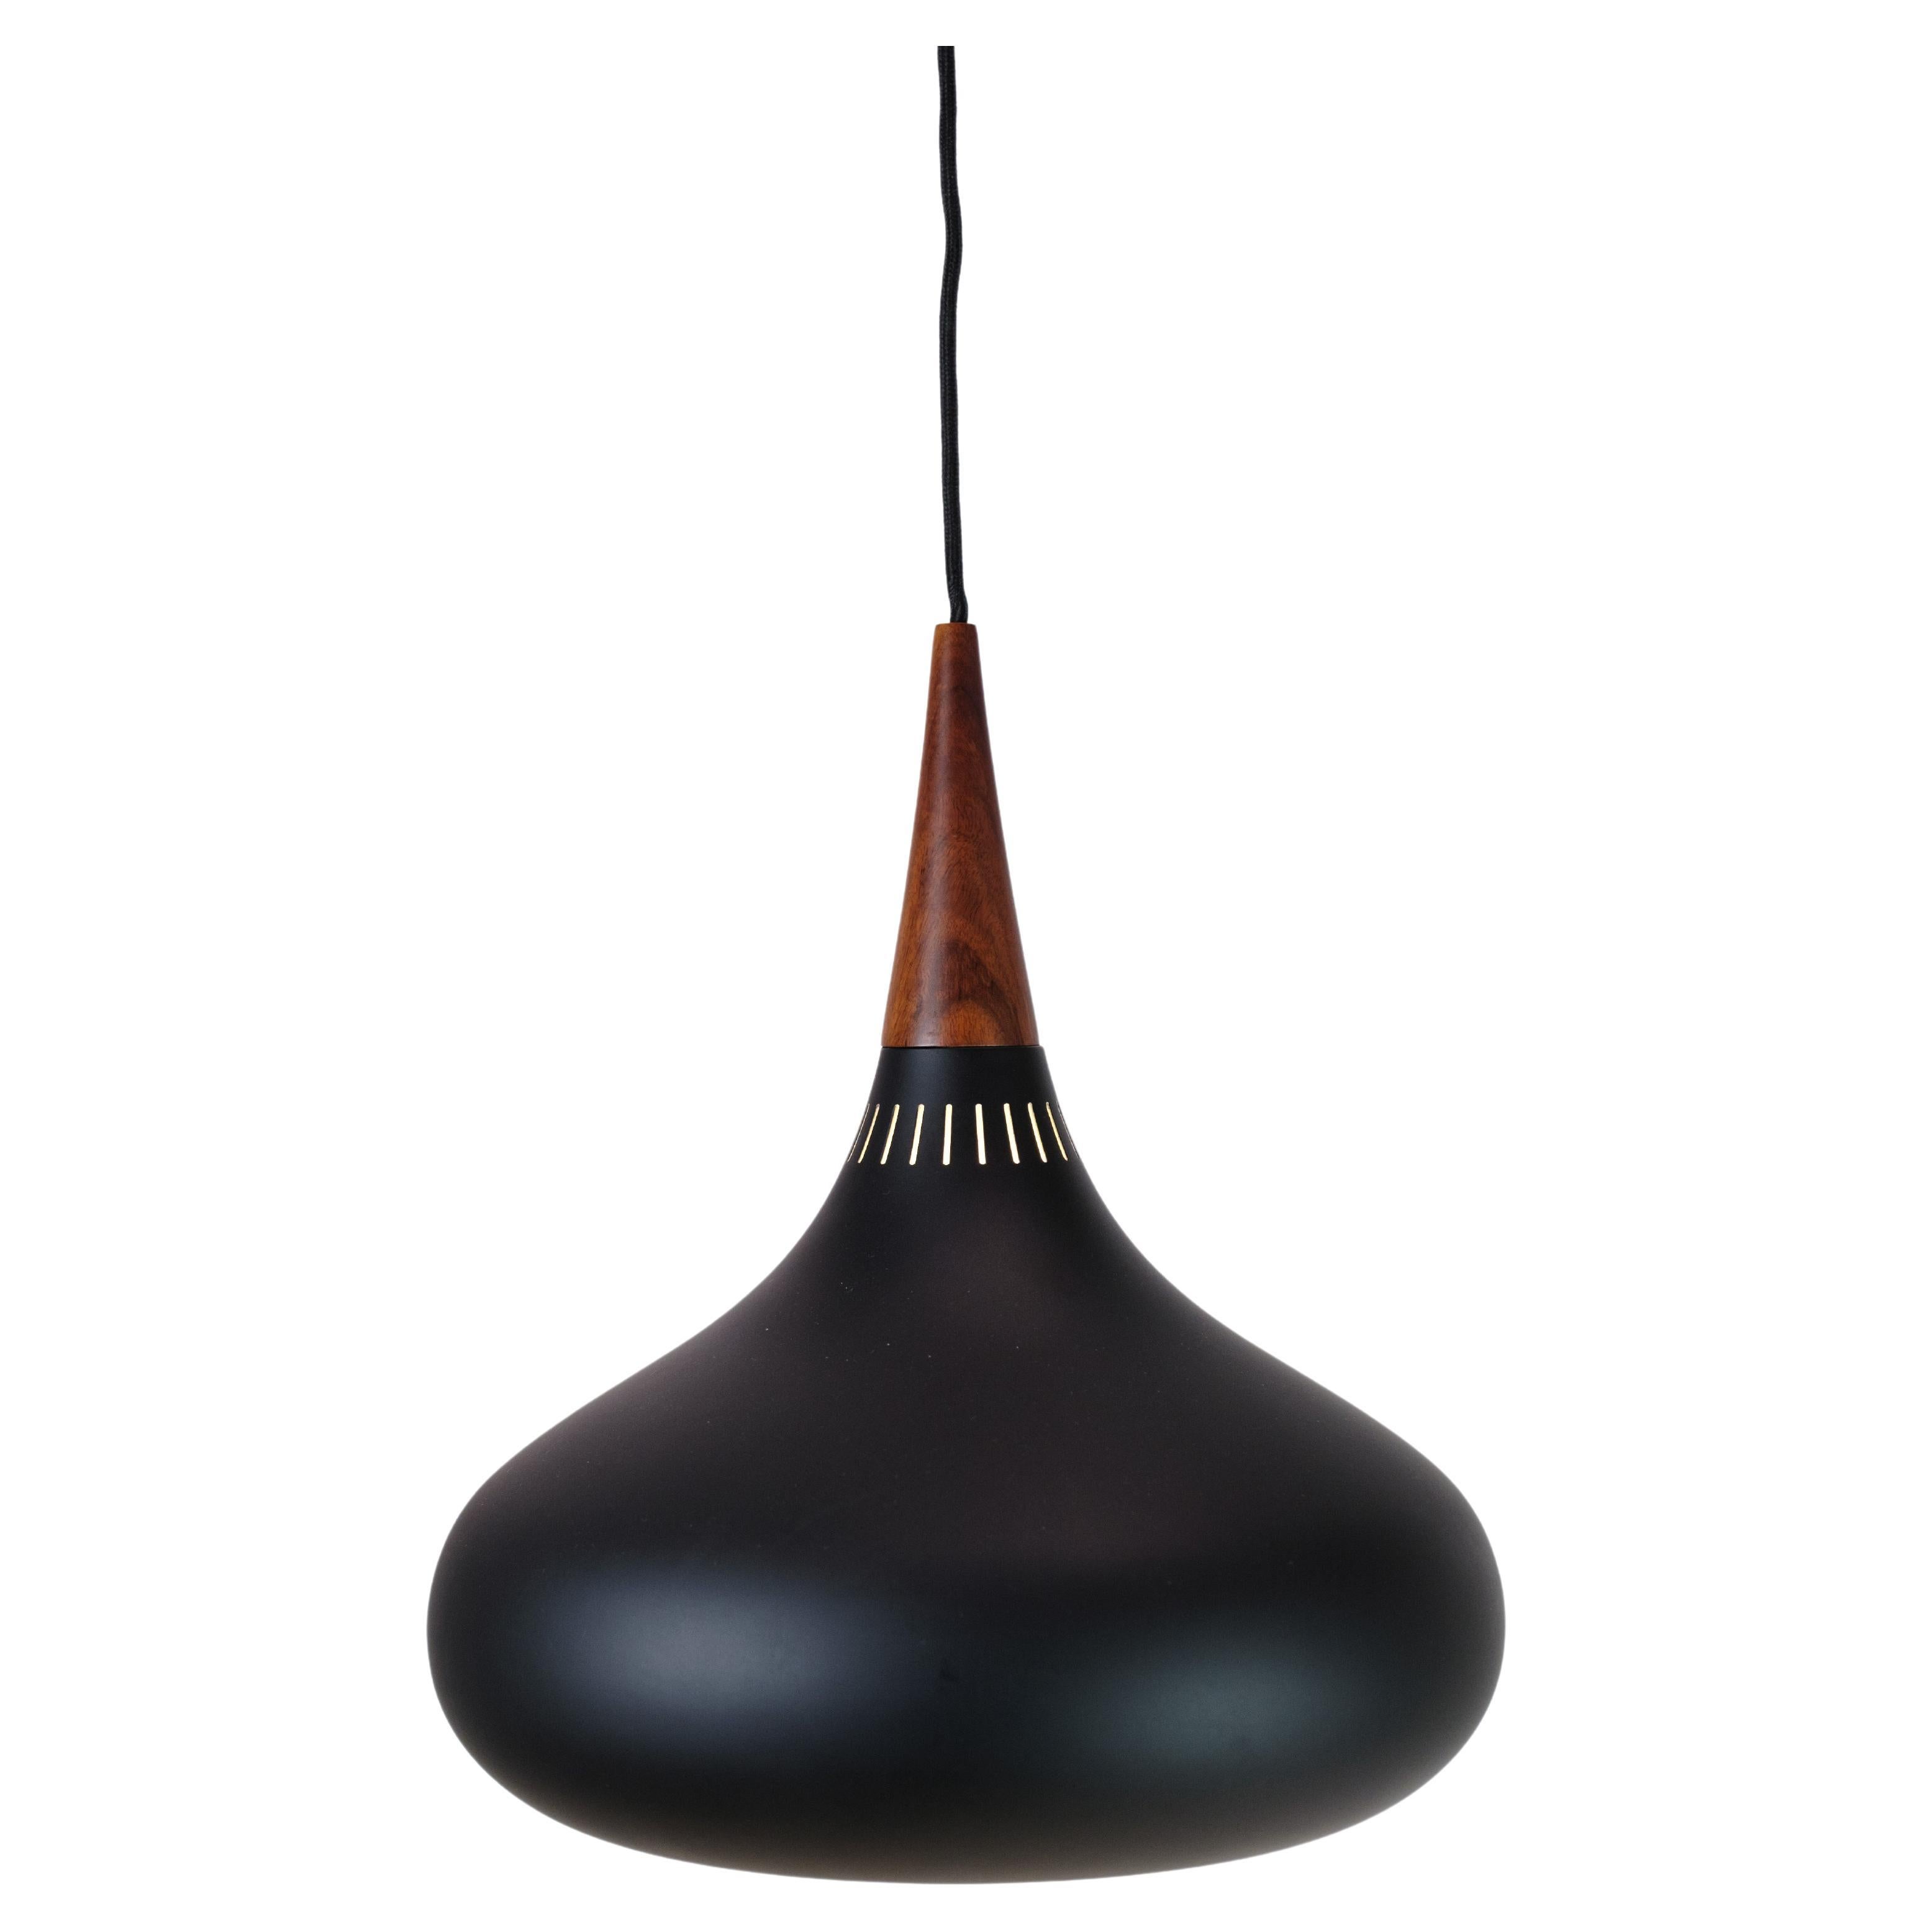 The Orient Pendulum designed by Jo Hammersborg produced by Fritz Hansen For Sale